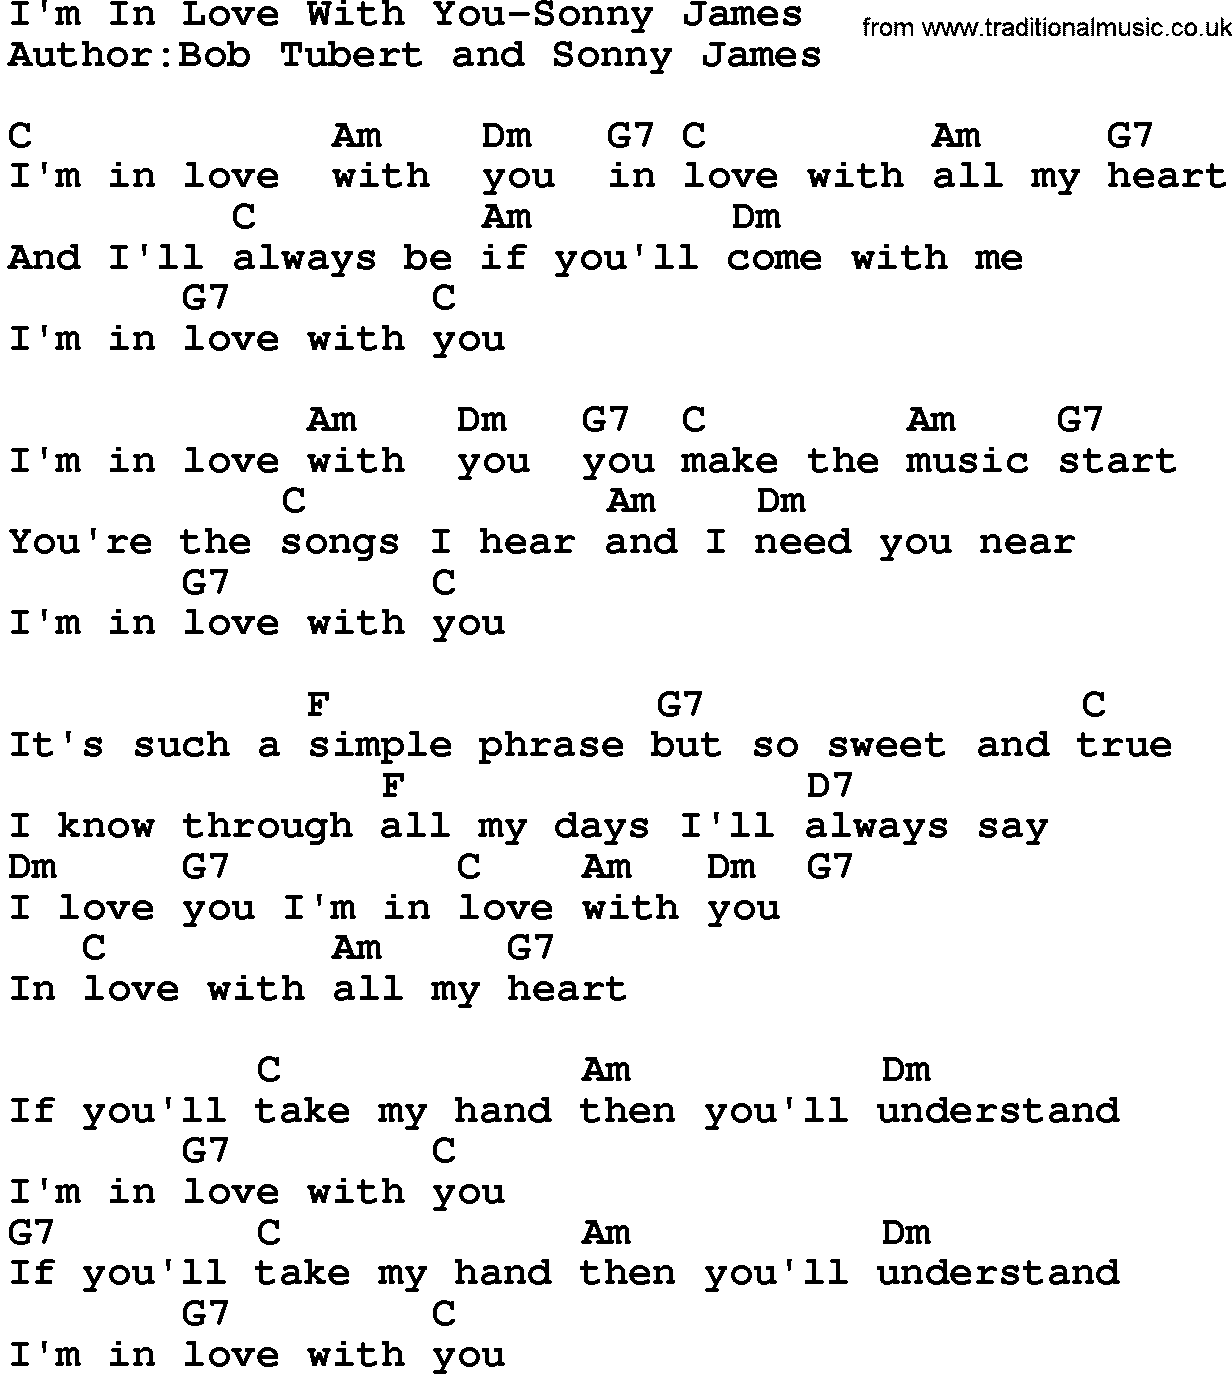 Country music song: I'm In Love With You-Sonny James lyrics and chords